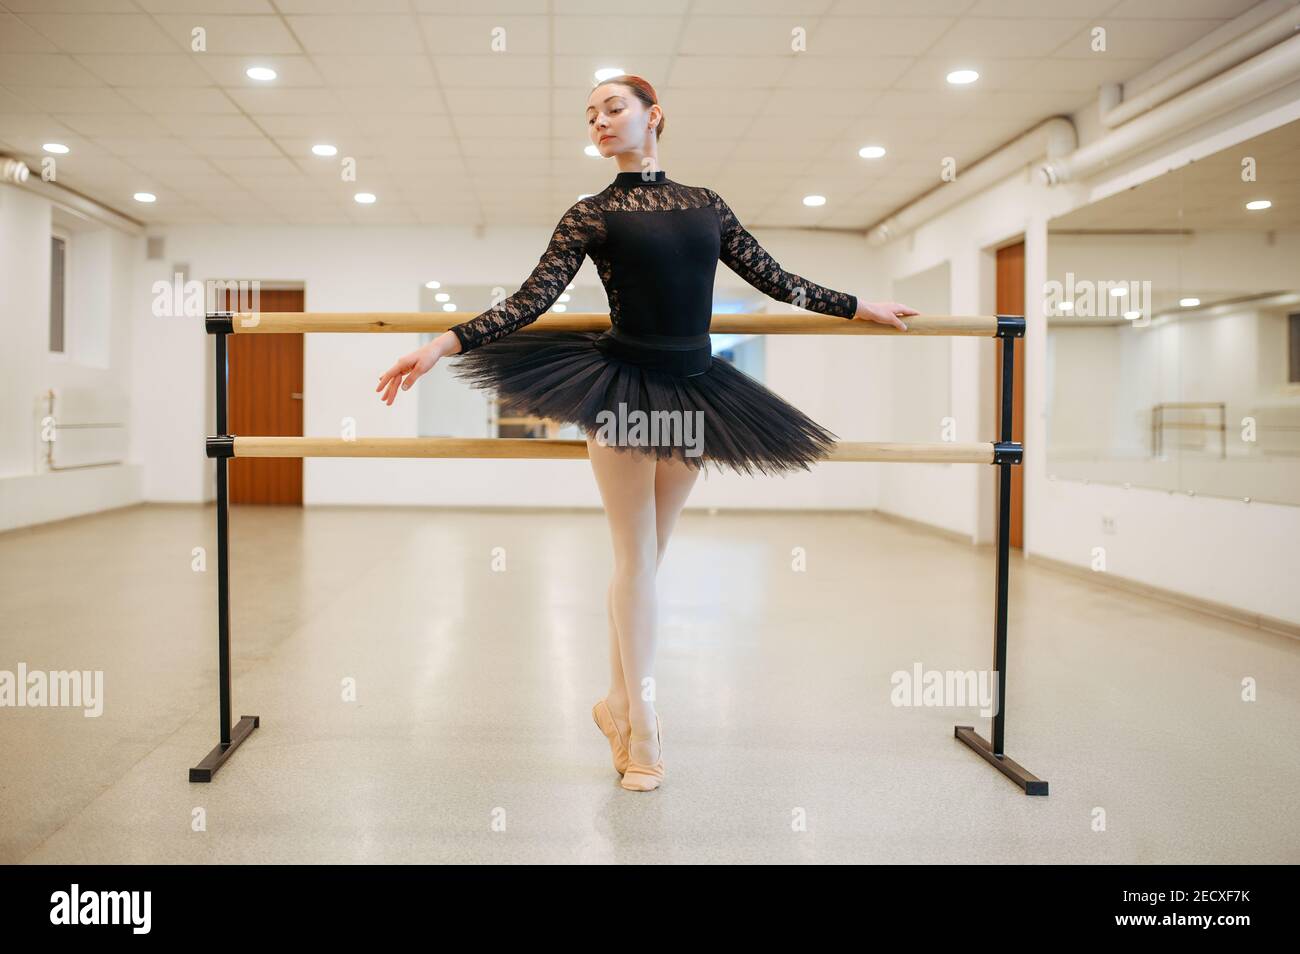 Ballerina poses at barre in class, ballet school Stock Photo